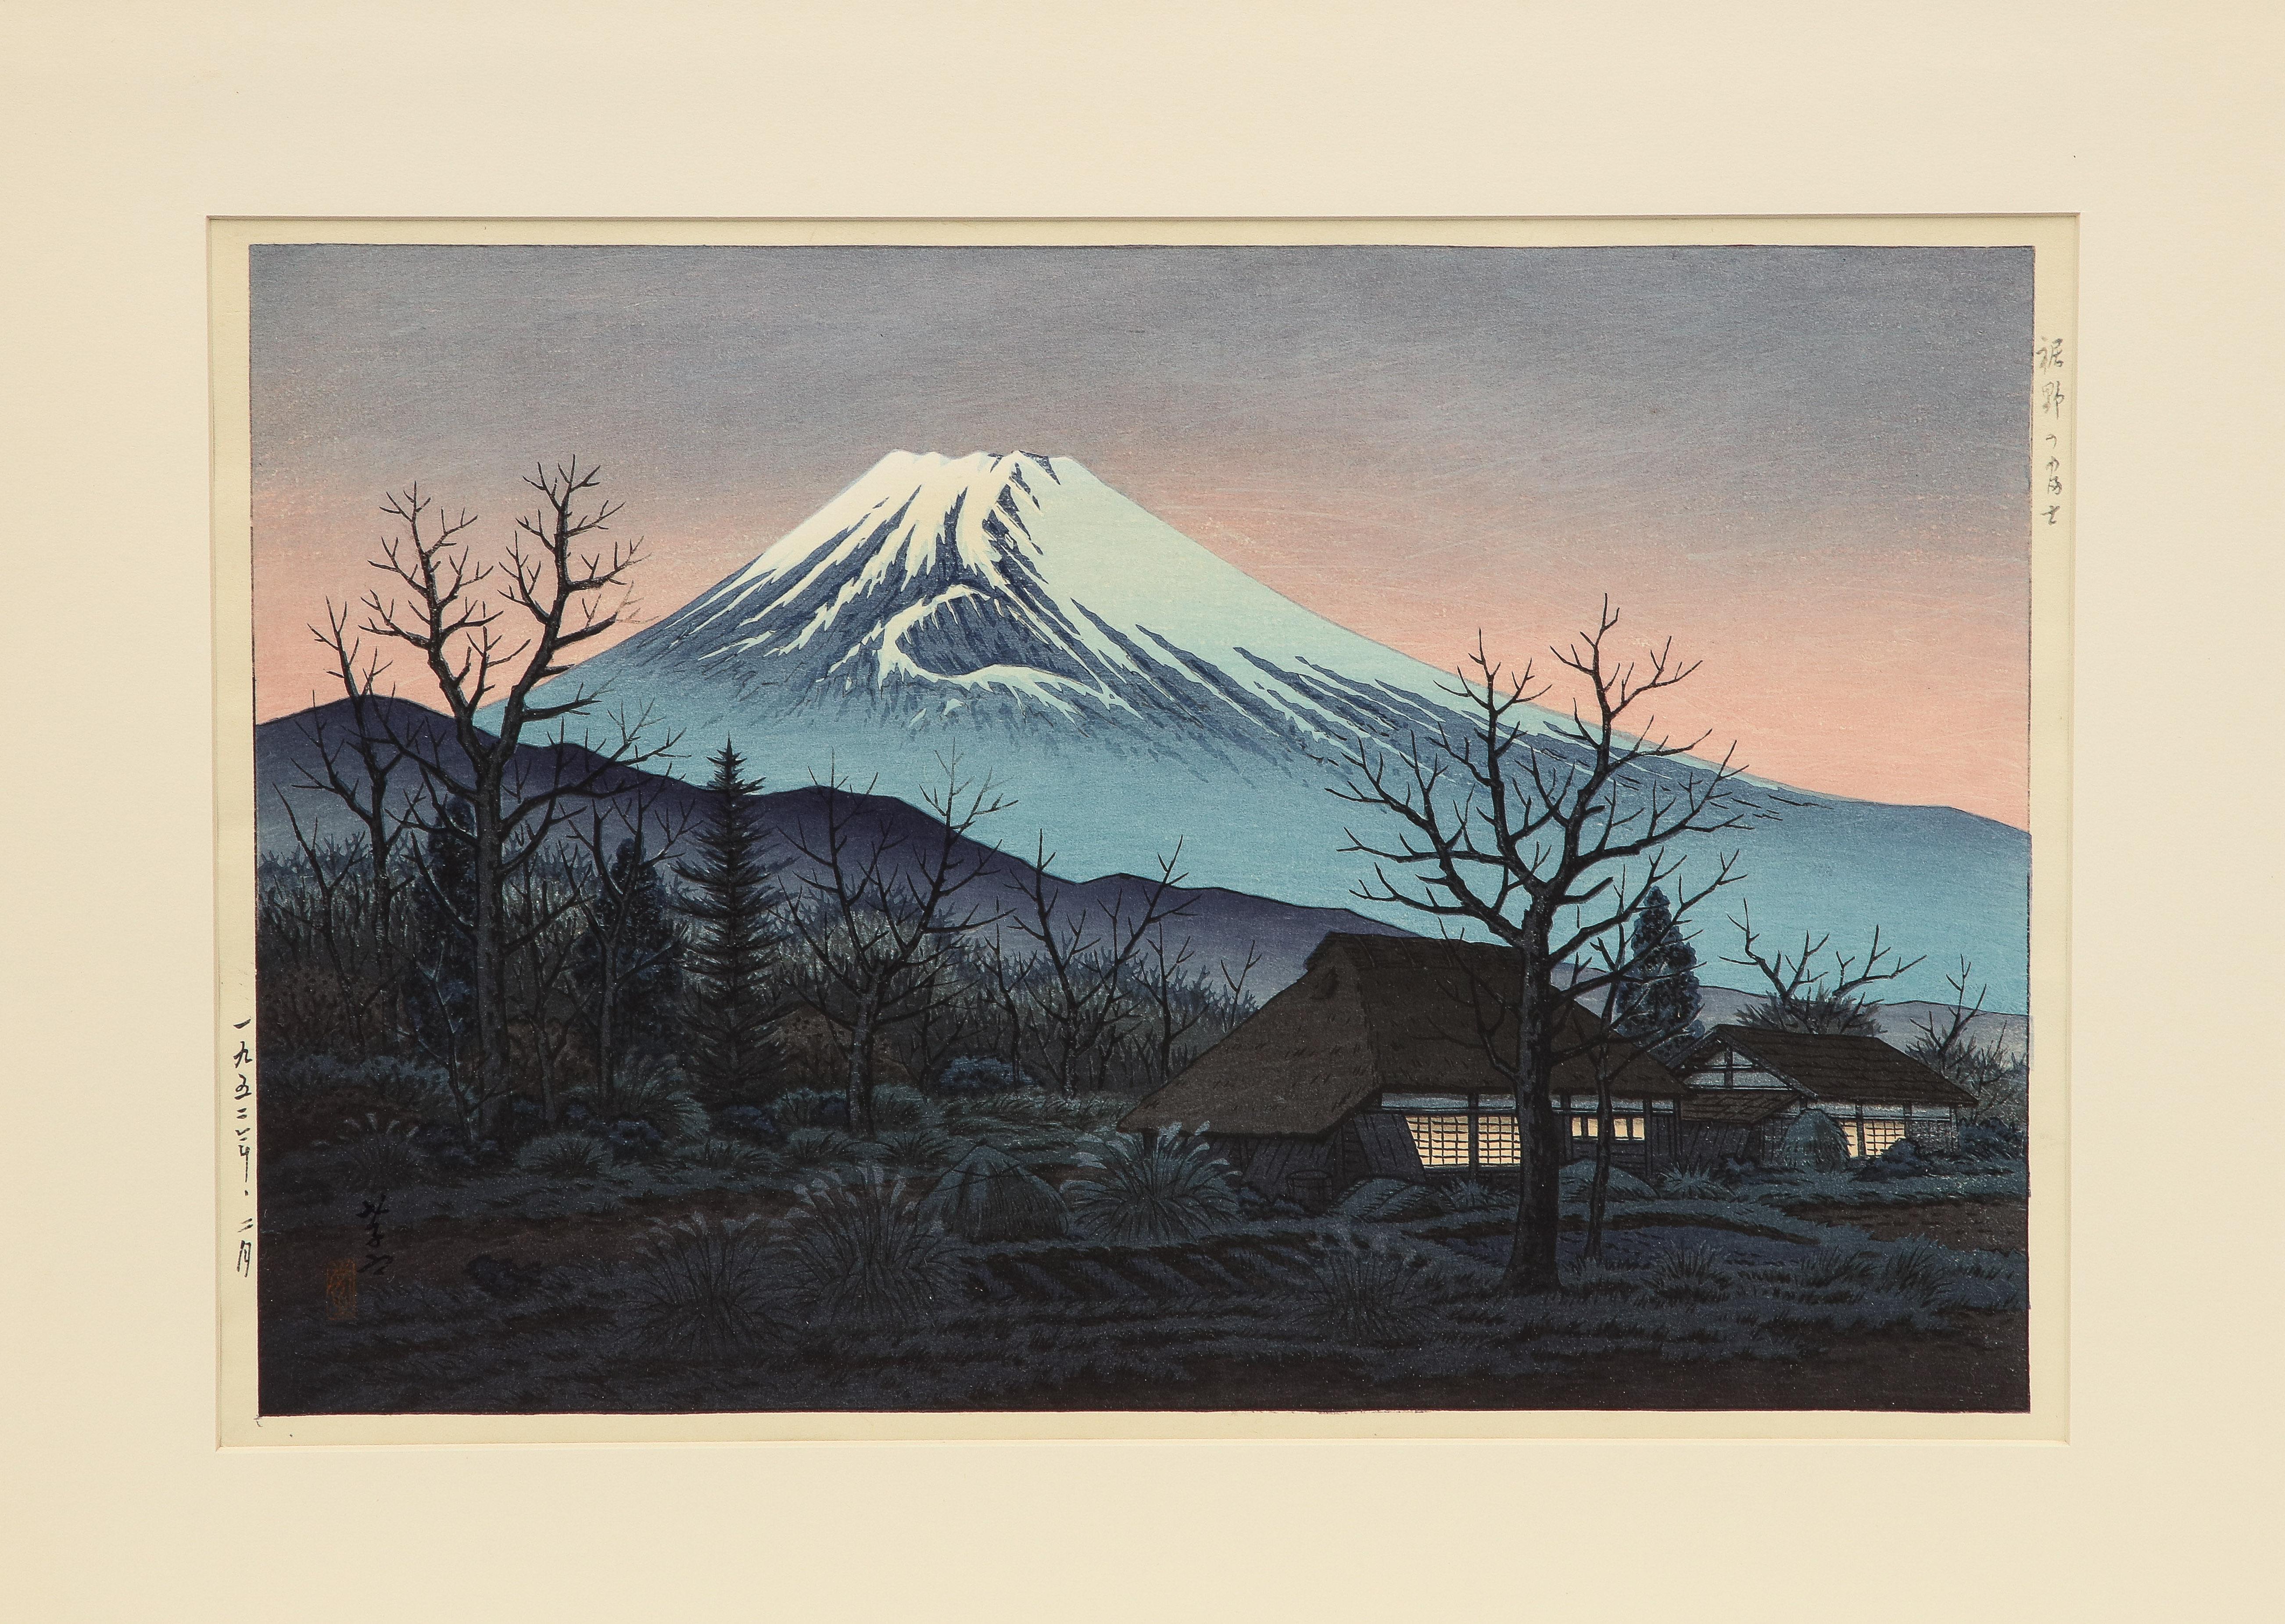 Ito Takashi Landscape Woodblock: Mt. Fuji from Susono. Beautiful Japanese woodblock with good colors; under glass with 1960s era matting and framing. The black frame, with gold trim, shows minor wear. Mat opening Size: 10 inches x 15 inches. The